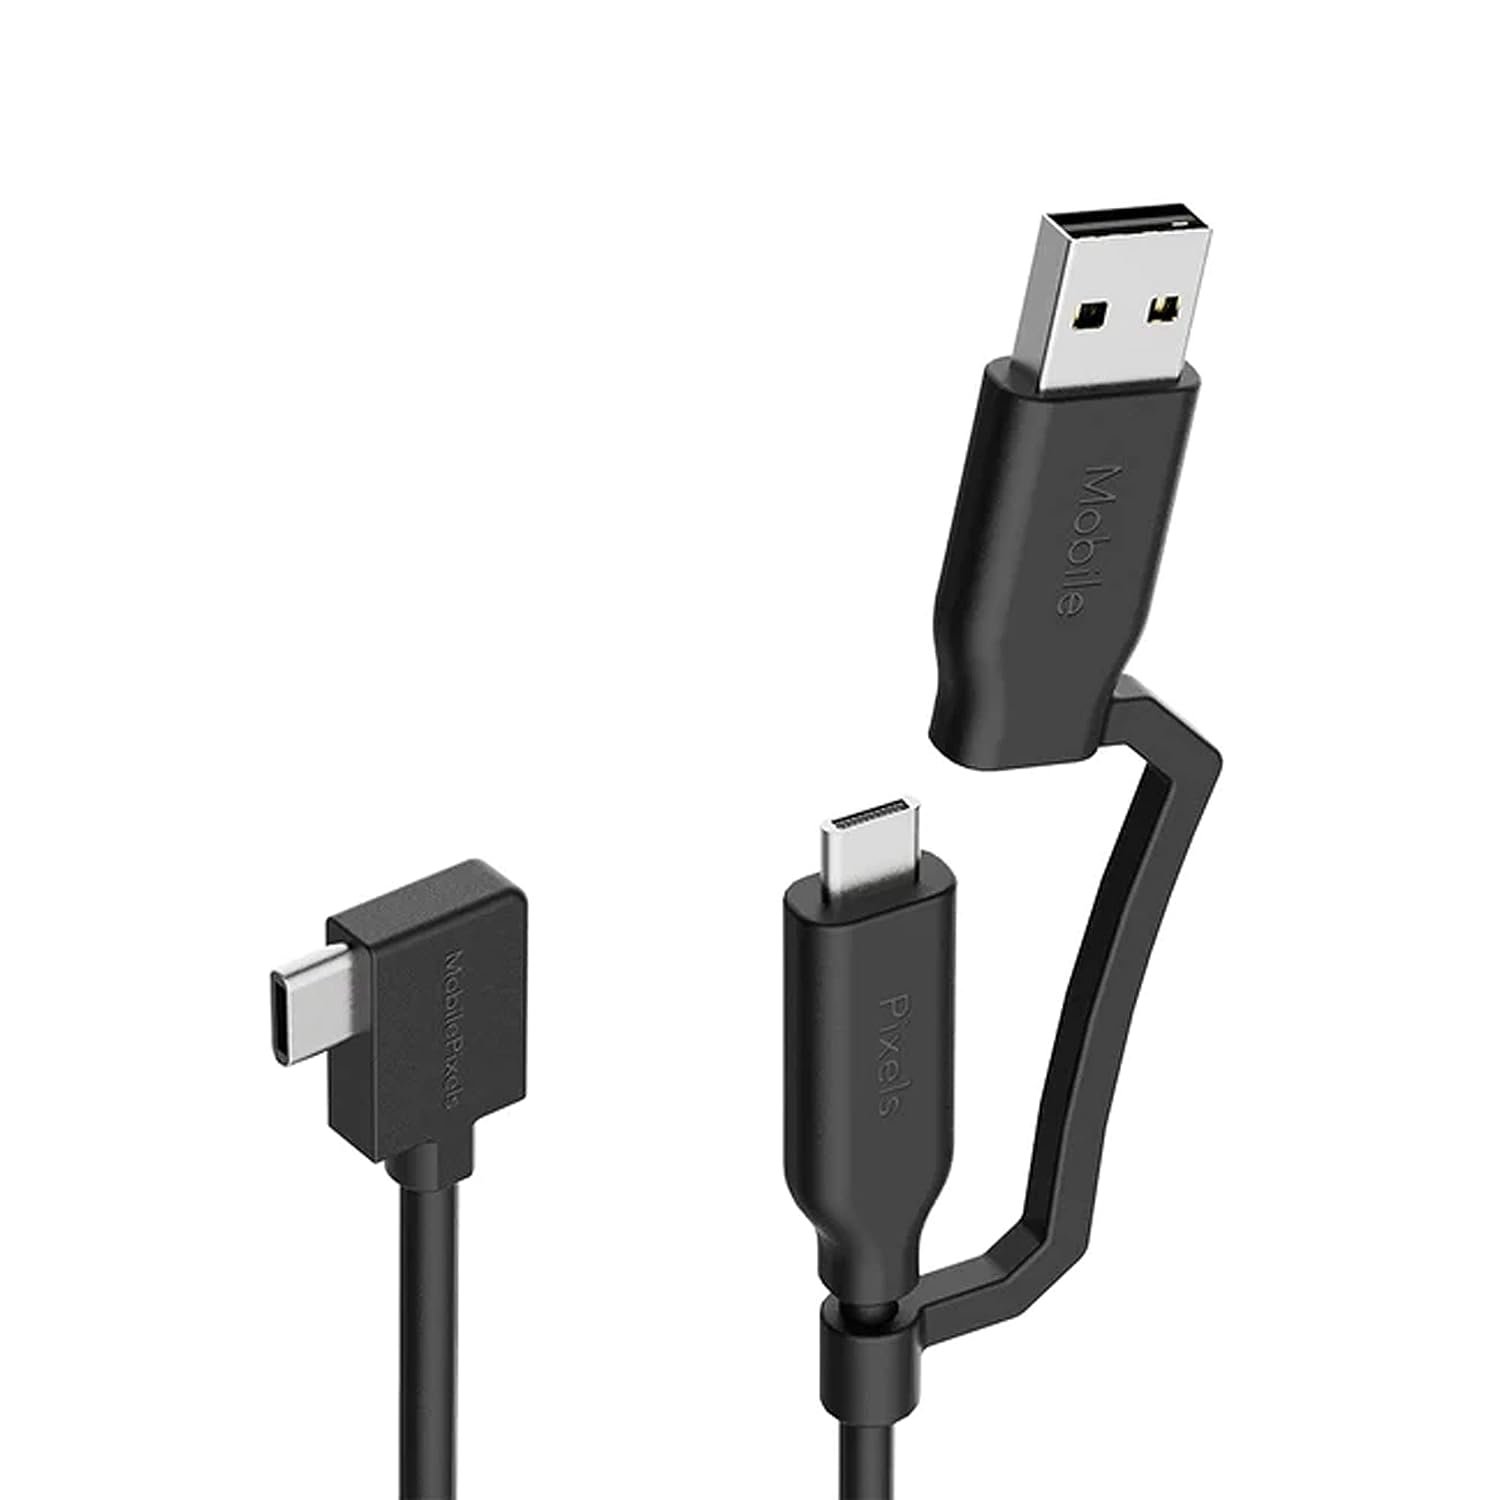 MP Mobile Pixels 2-in-1 USB Cable: A Versatile and Convenient Solution for Your Connectivity Needs